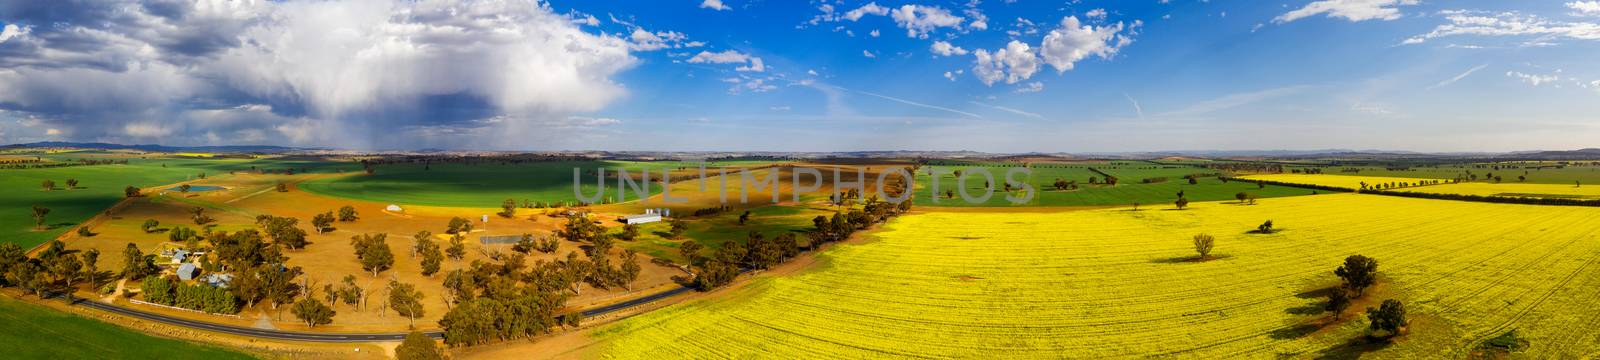 Panoramic country fields and agricultural farmlands for miles and miles in rural NSW Australia - 7 images stitched together